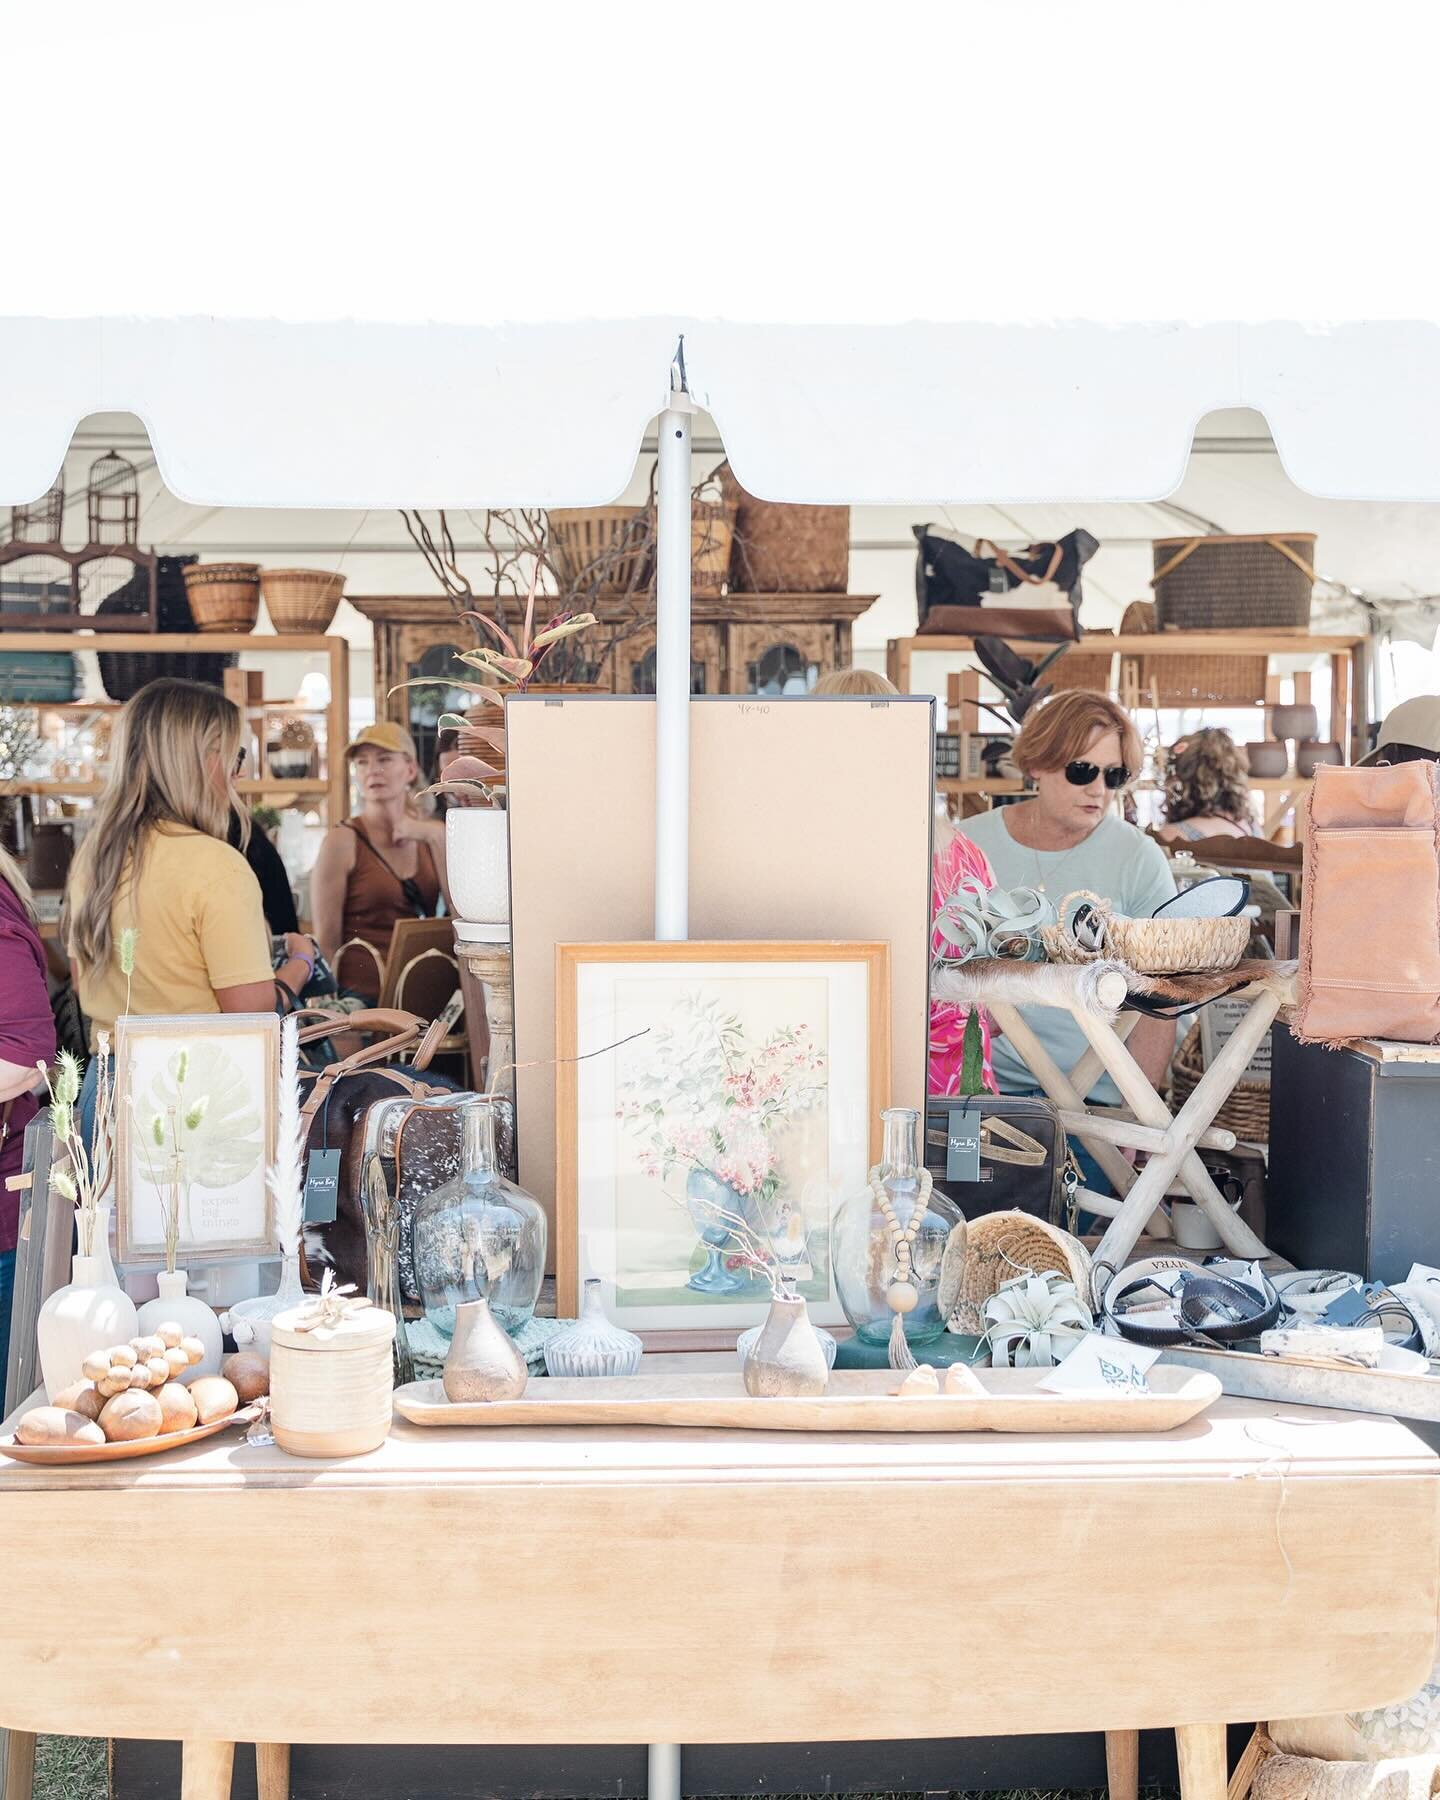 Hey Early Birds! 🕊️ Be the first to shop all the Flea Market treasures on Saturday, May 11 from 8am-10am. Early Bird tickets are valid for the rest of the weekend too 😊 Raise your hands in the comments if you&rsquo;ll be the first in line!!